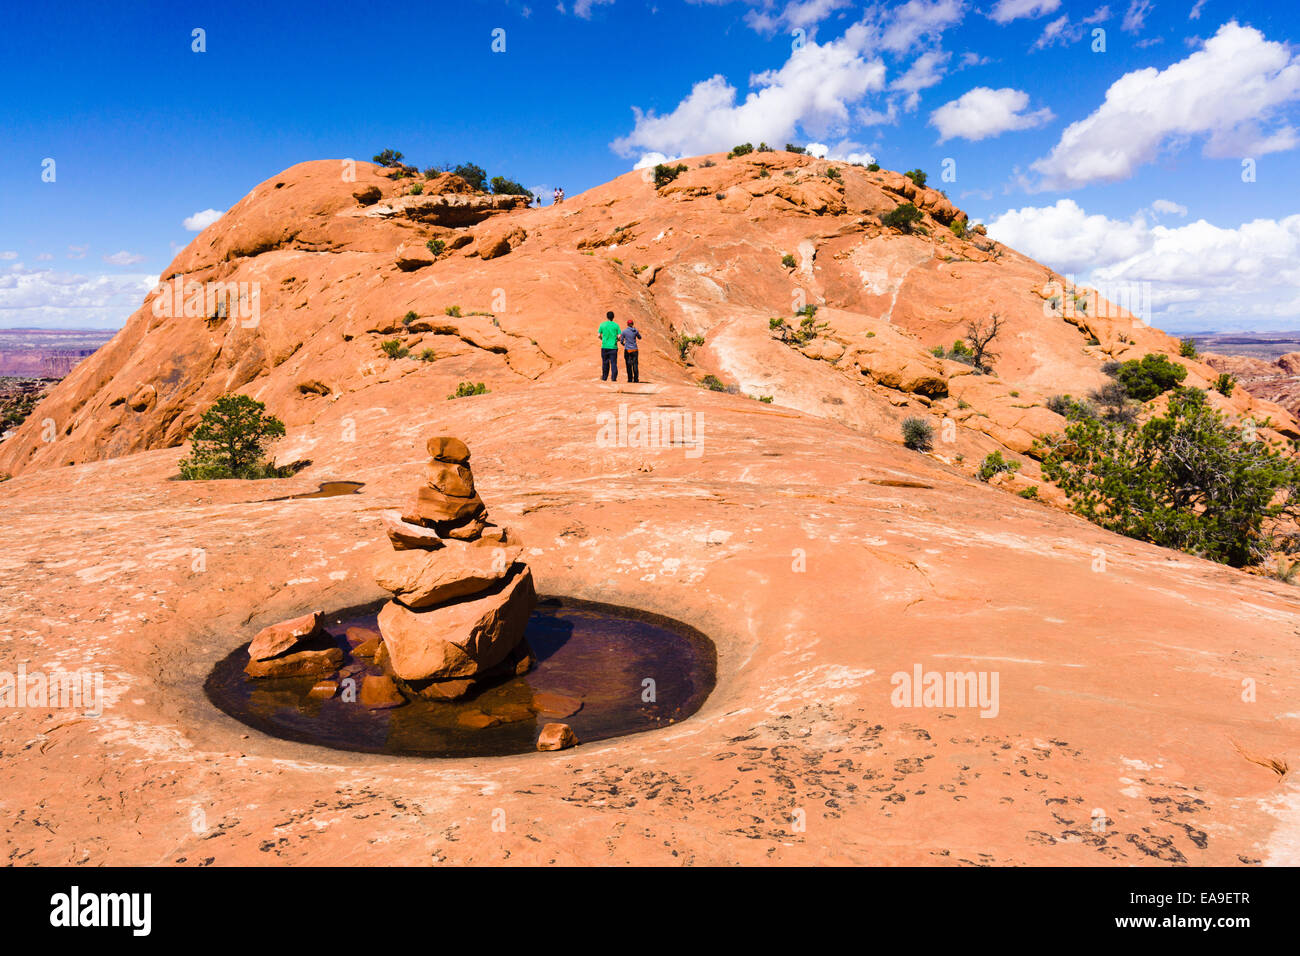 Rock cairn at Upheaval Dome hiking trail. Canyonlands National Park, Island in the Sky region. Utah, USA. Stock Photo